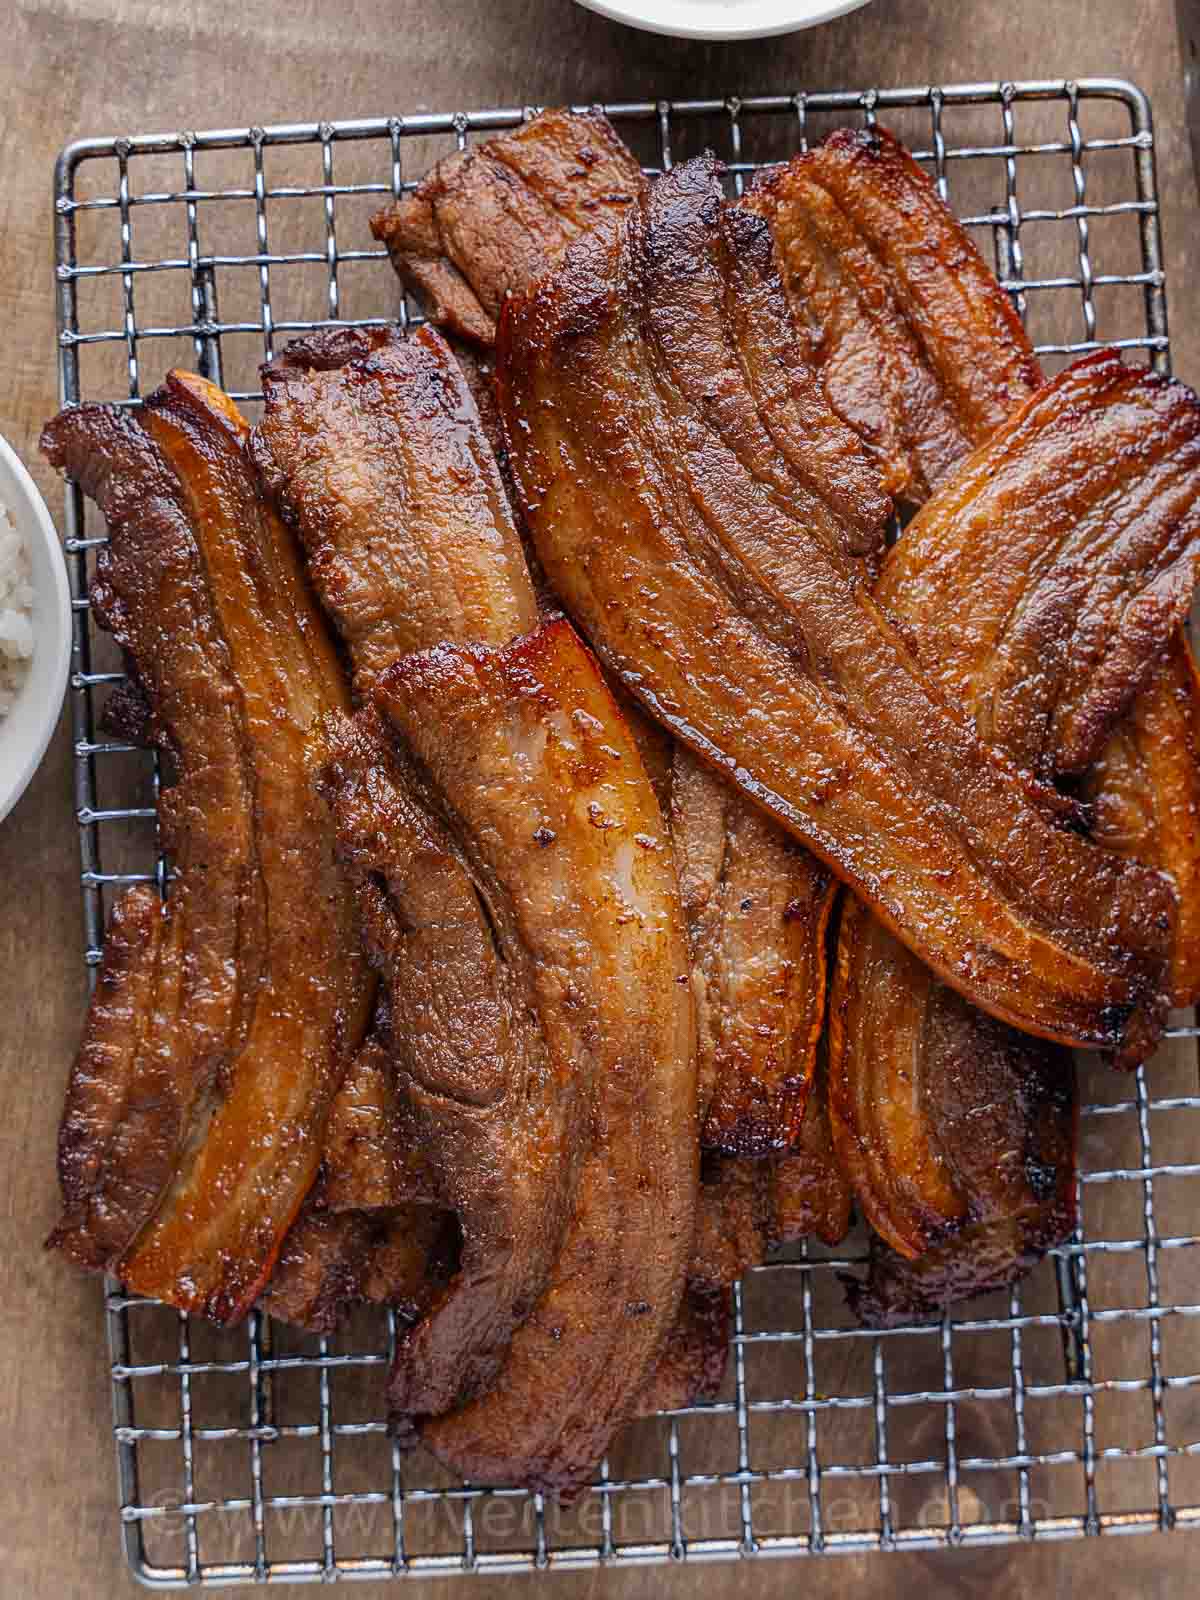 Thin slices of pork belly marinated then grilled or air fried.